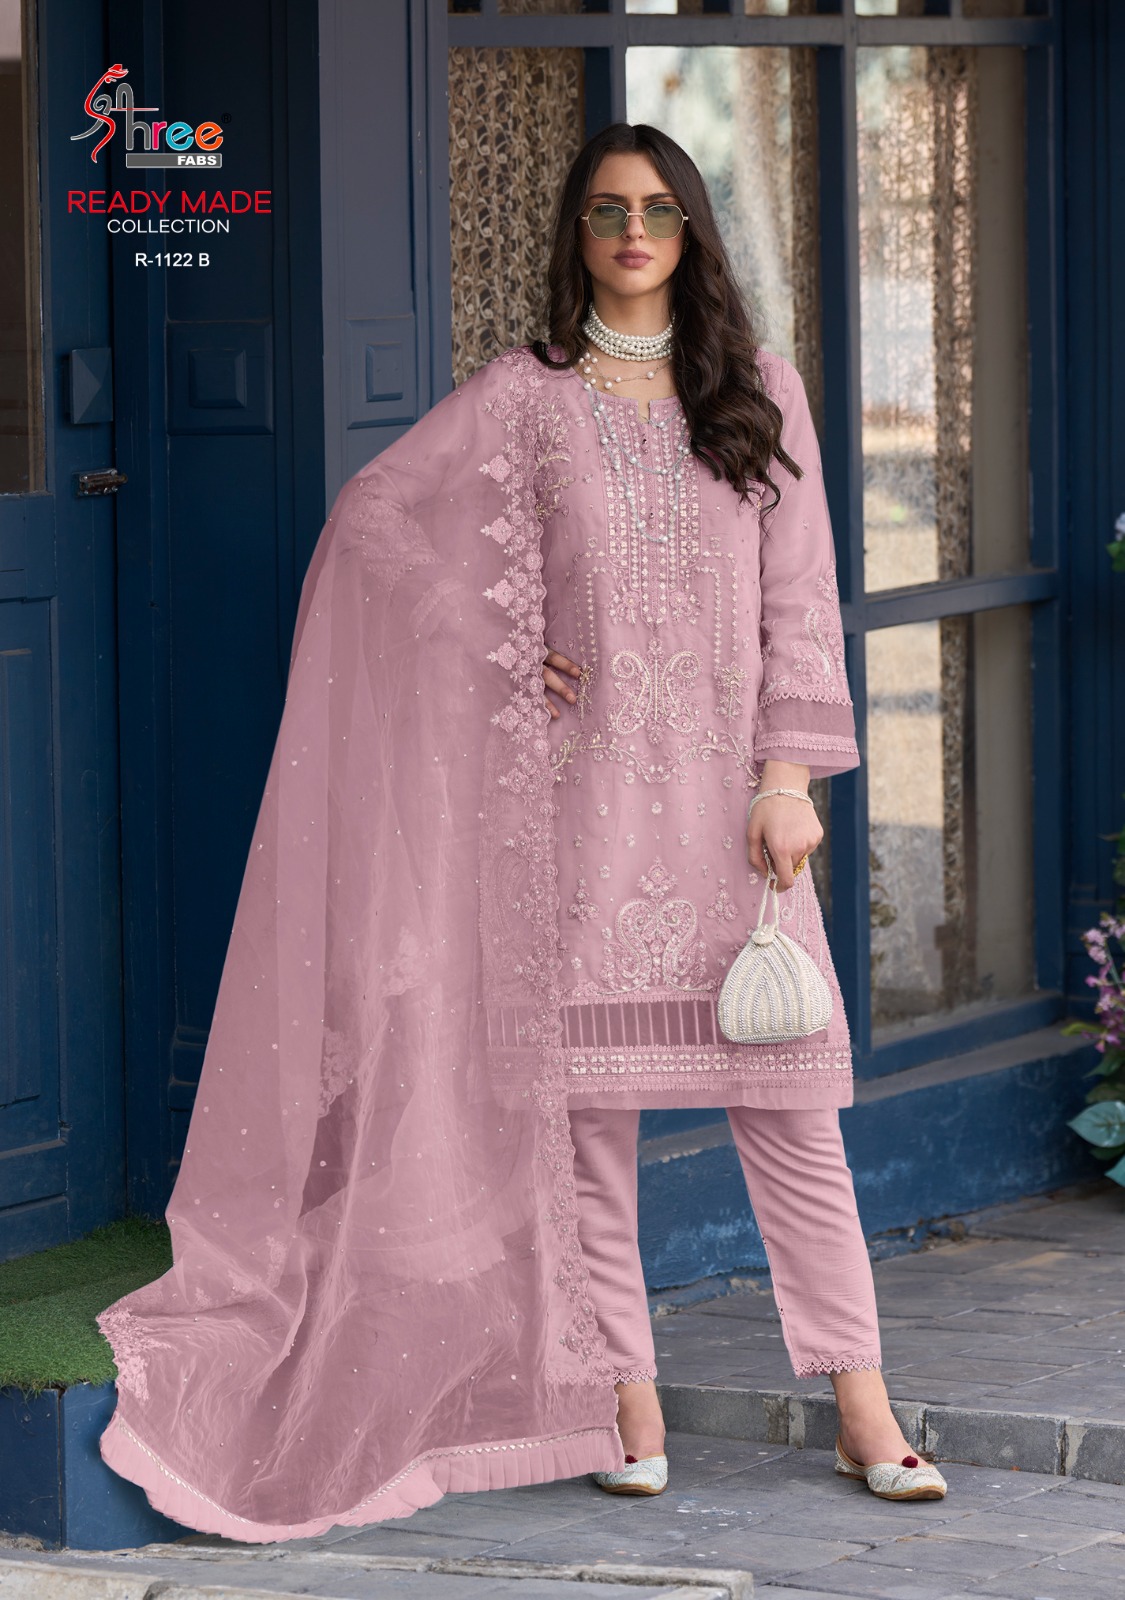 SHREE FABS R 1122 B READYMADE SUITS IN INDIA